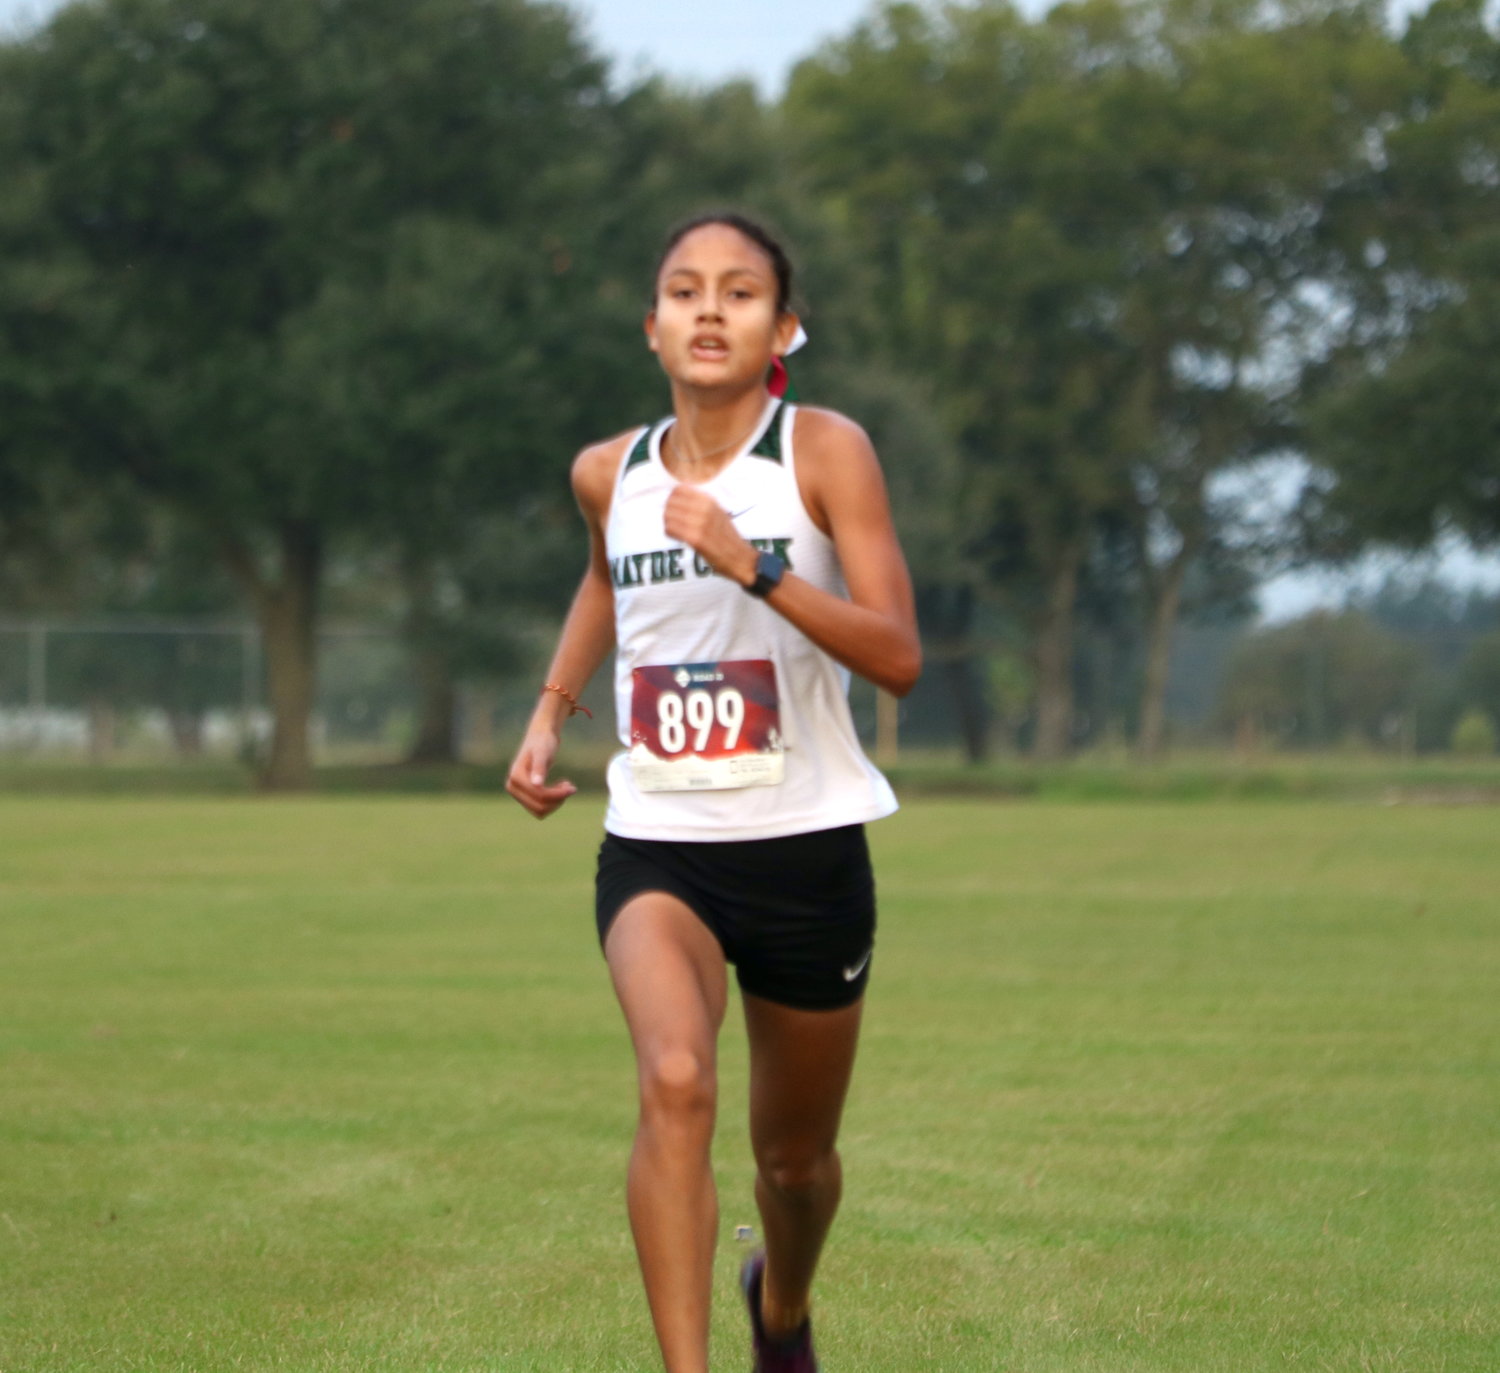 Rachel Solano runs towards the finish line during Tuesday's District 19-6A meet at Paul Rushing Park.